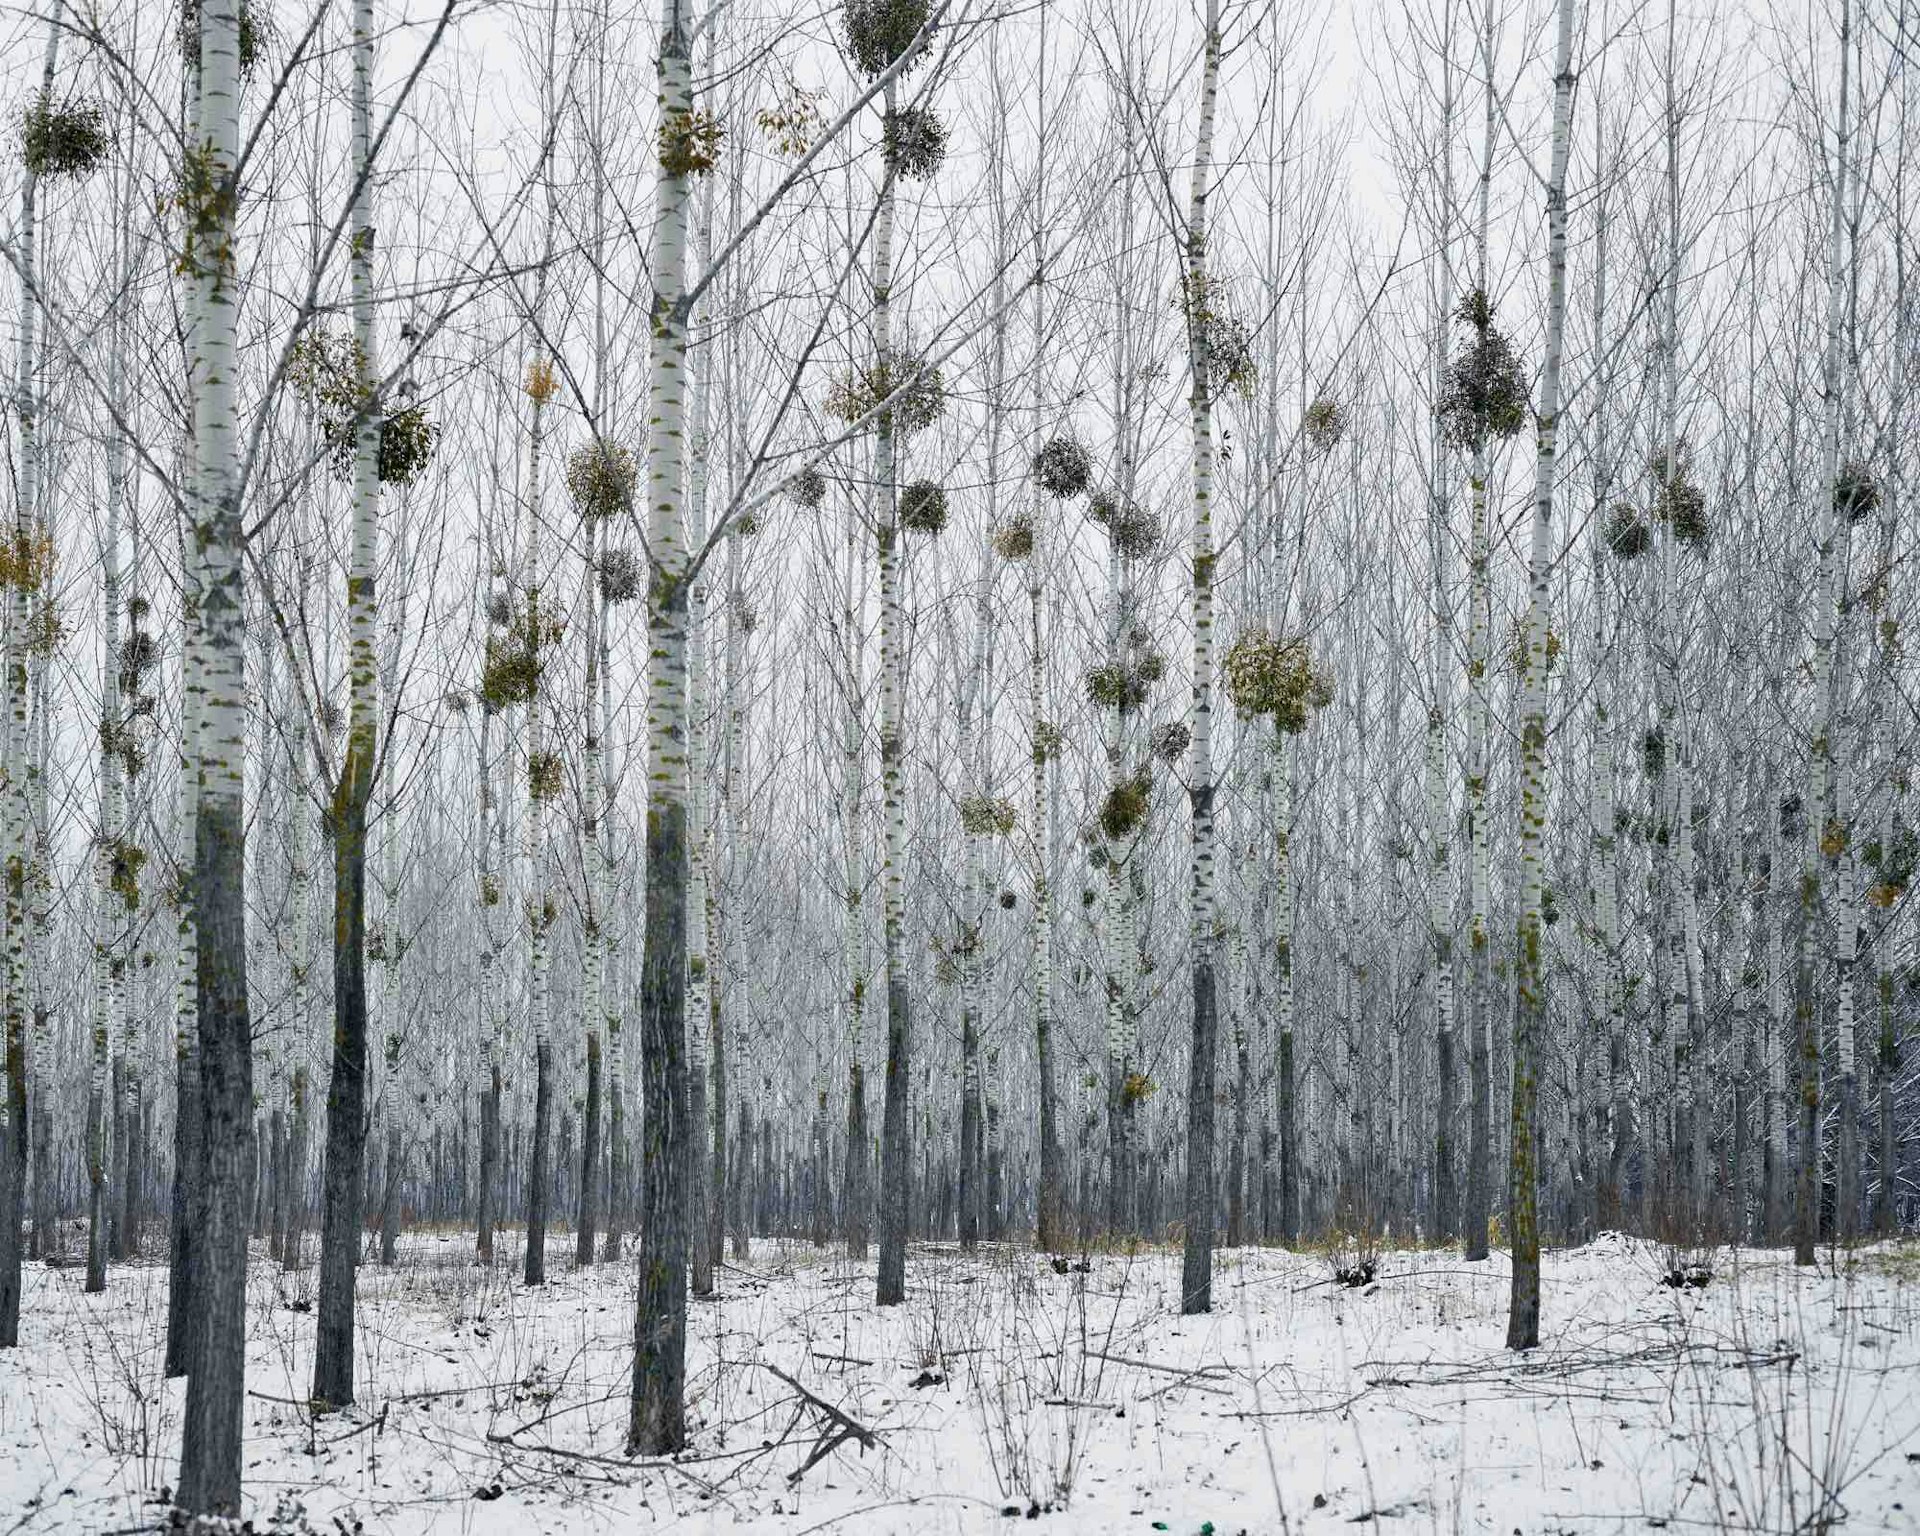 Forest With Mistletoe, West Romania, from the series Notes for an Epilogue, 2011-2015 © Tamas Dezso. Courtesy of The Photographers' Gallery.